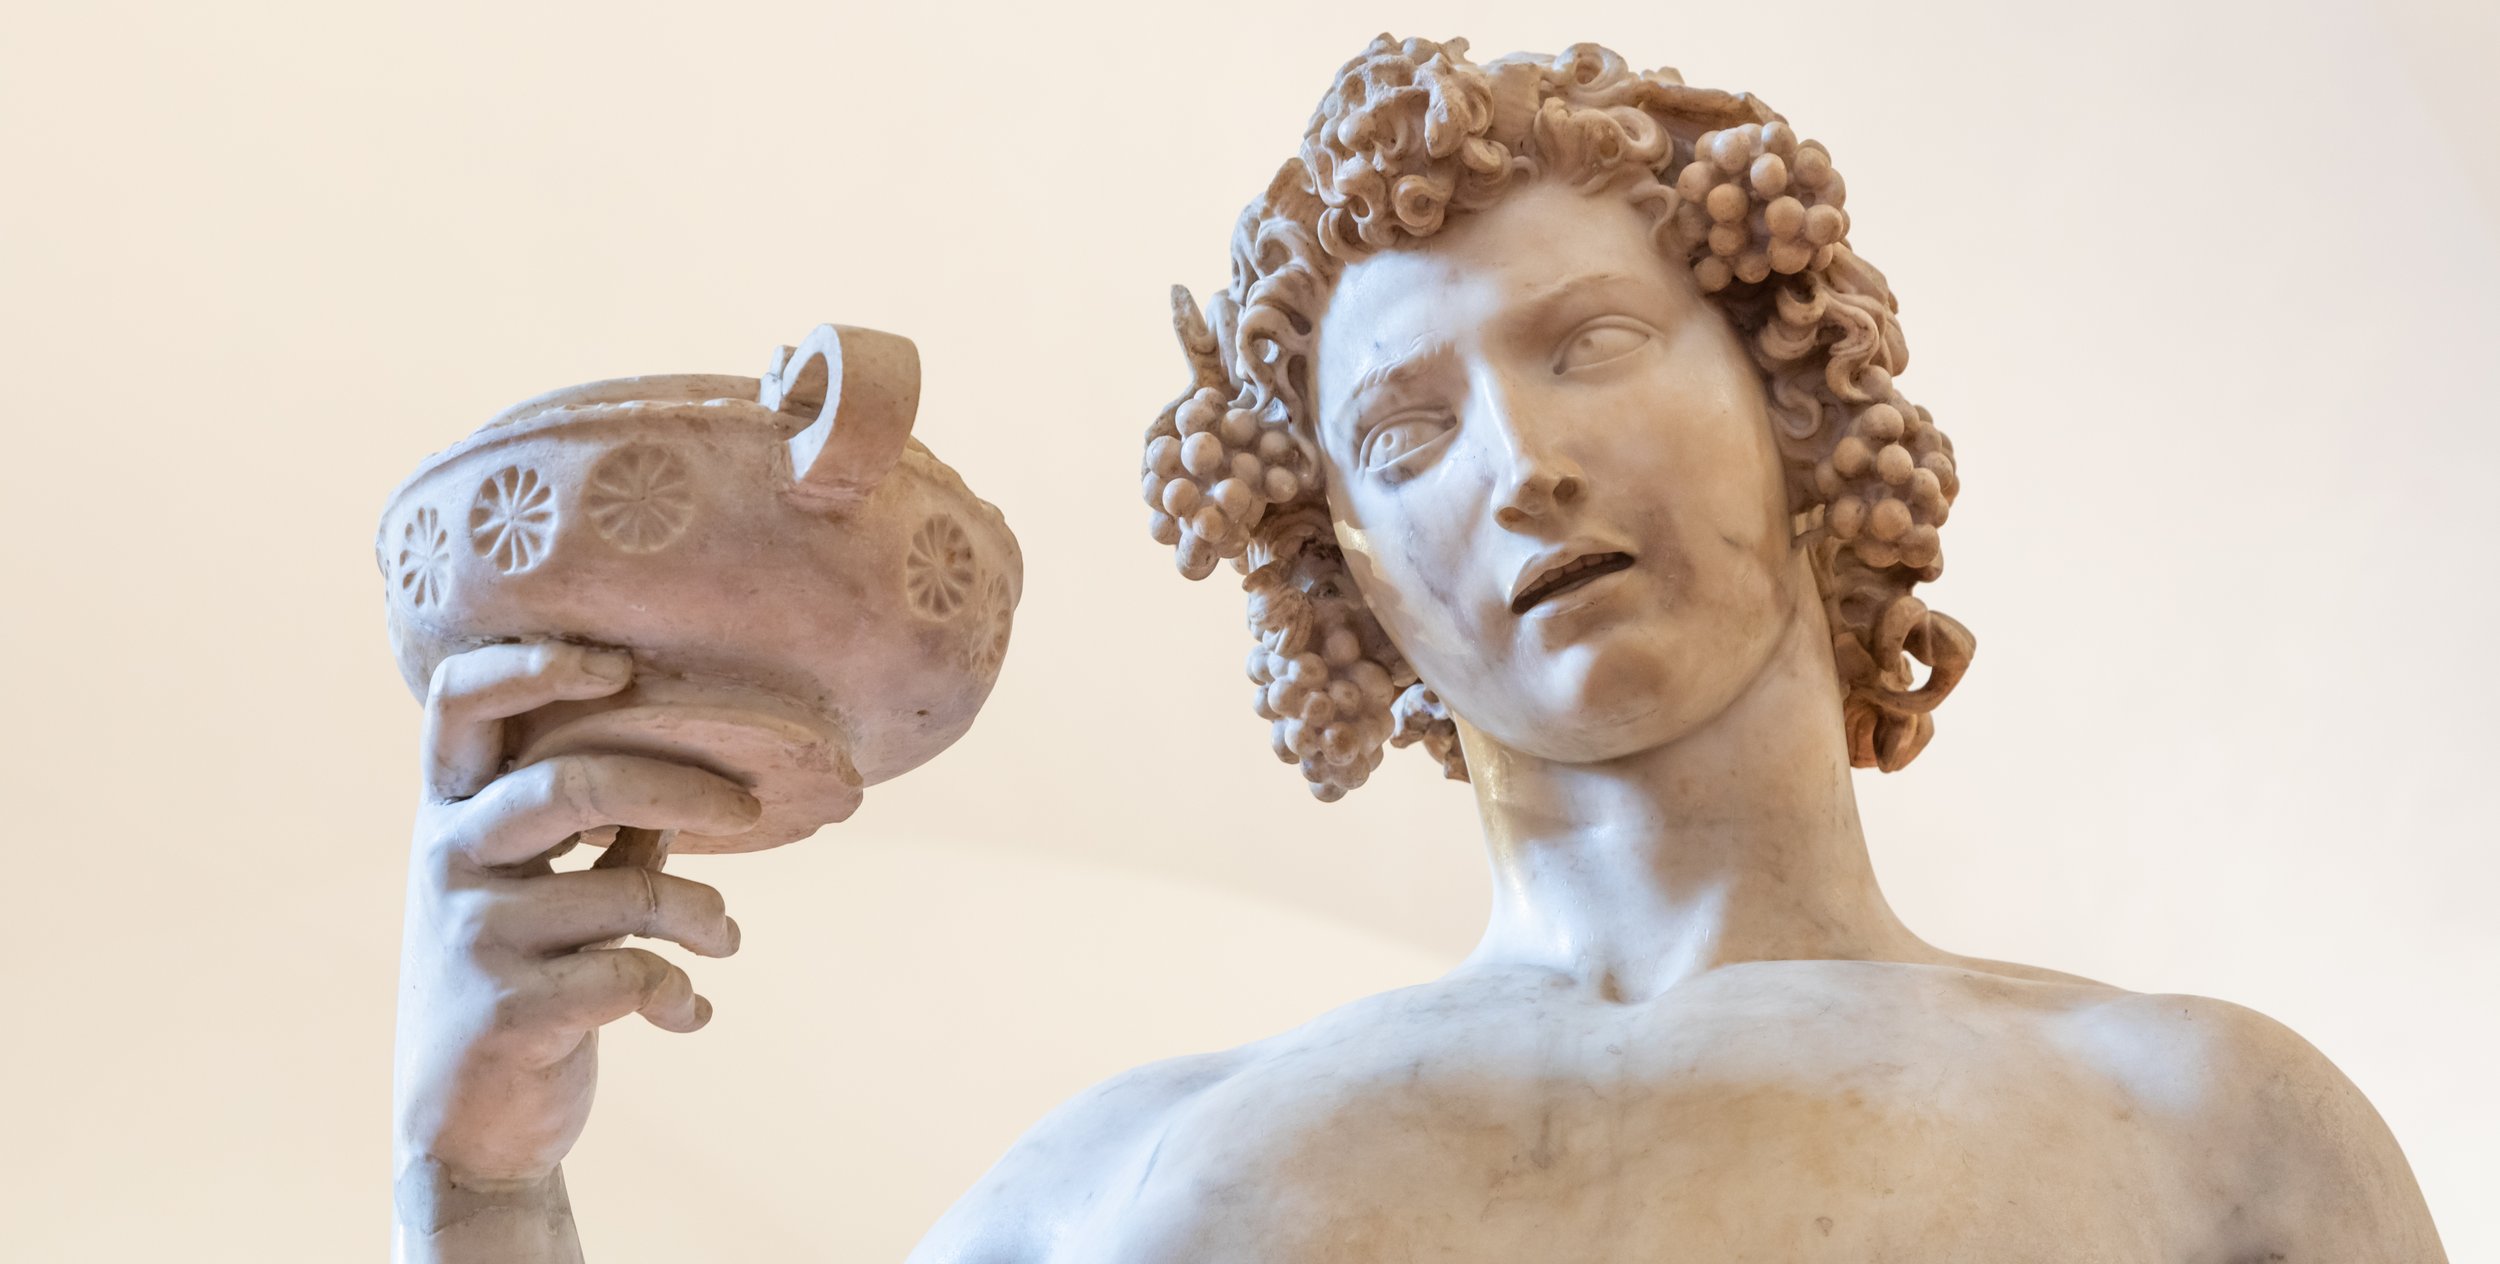 florence-italy-circa-june-2021-bacchus-by-michelangelo-buonarroti-1501-ancient-sculpture-made-white-marble.jpg